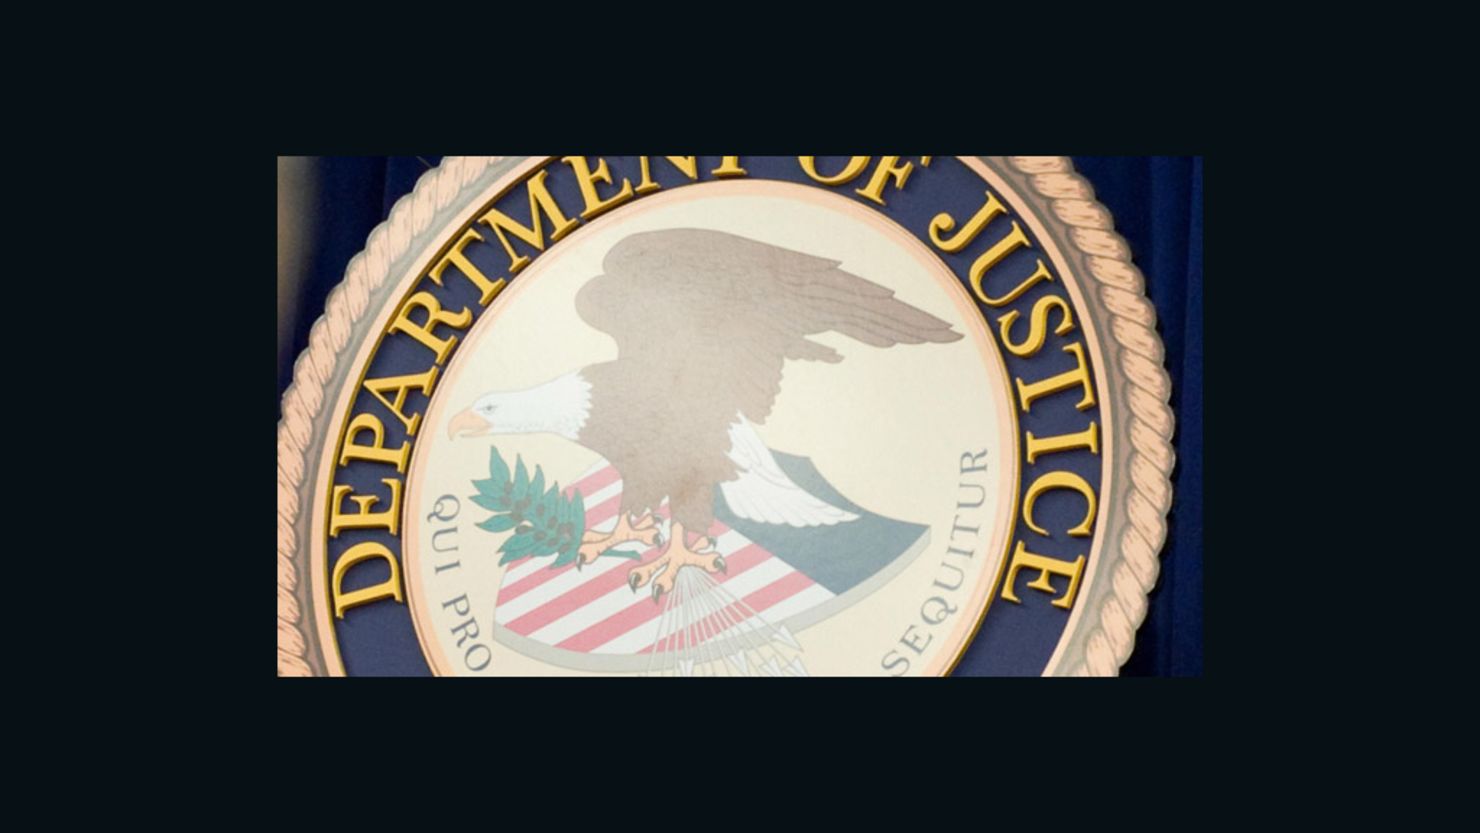 Department of Justice sign